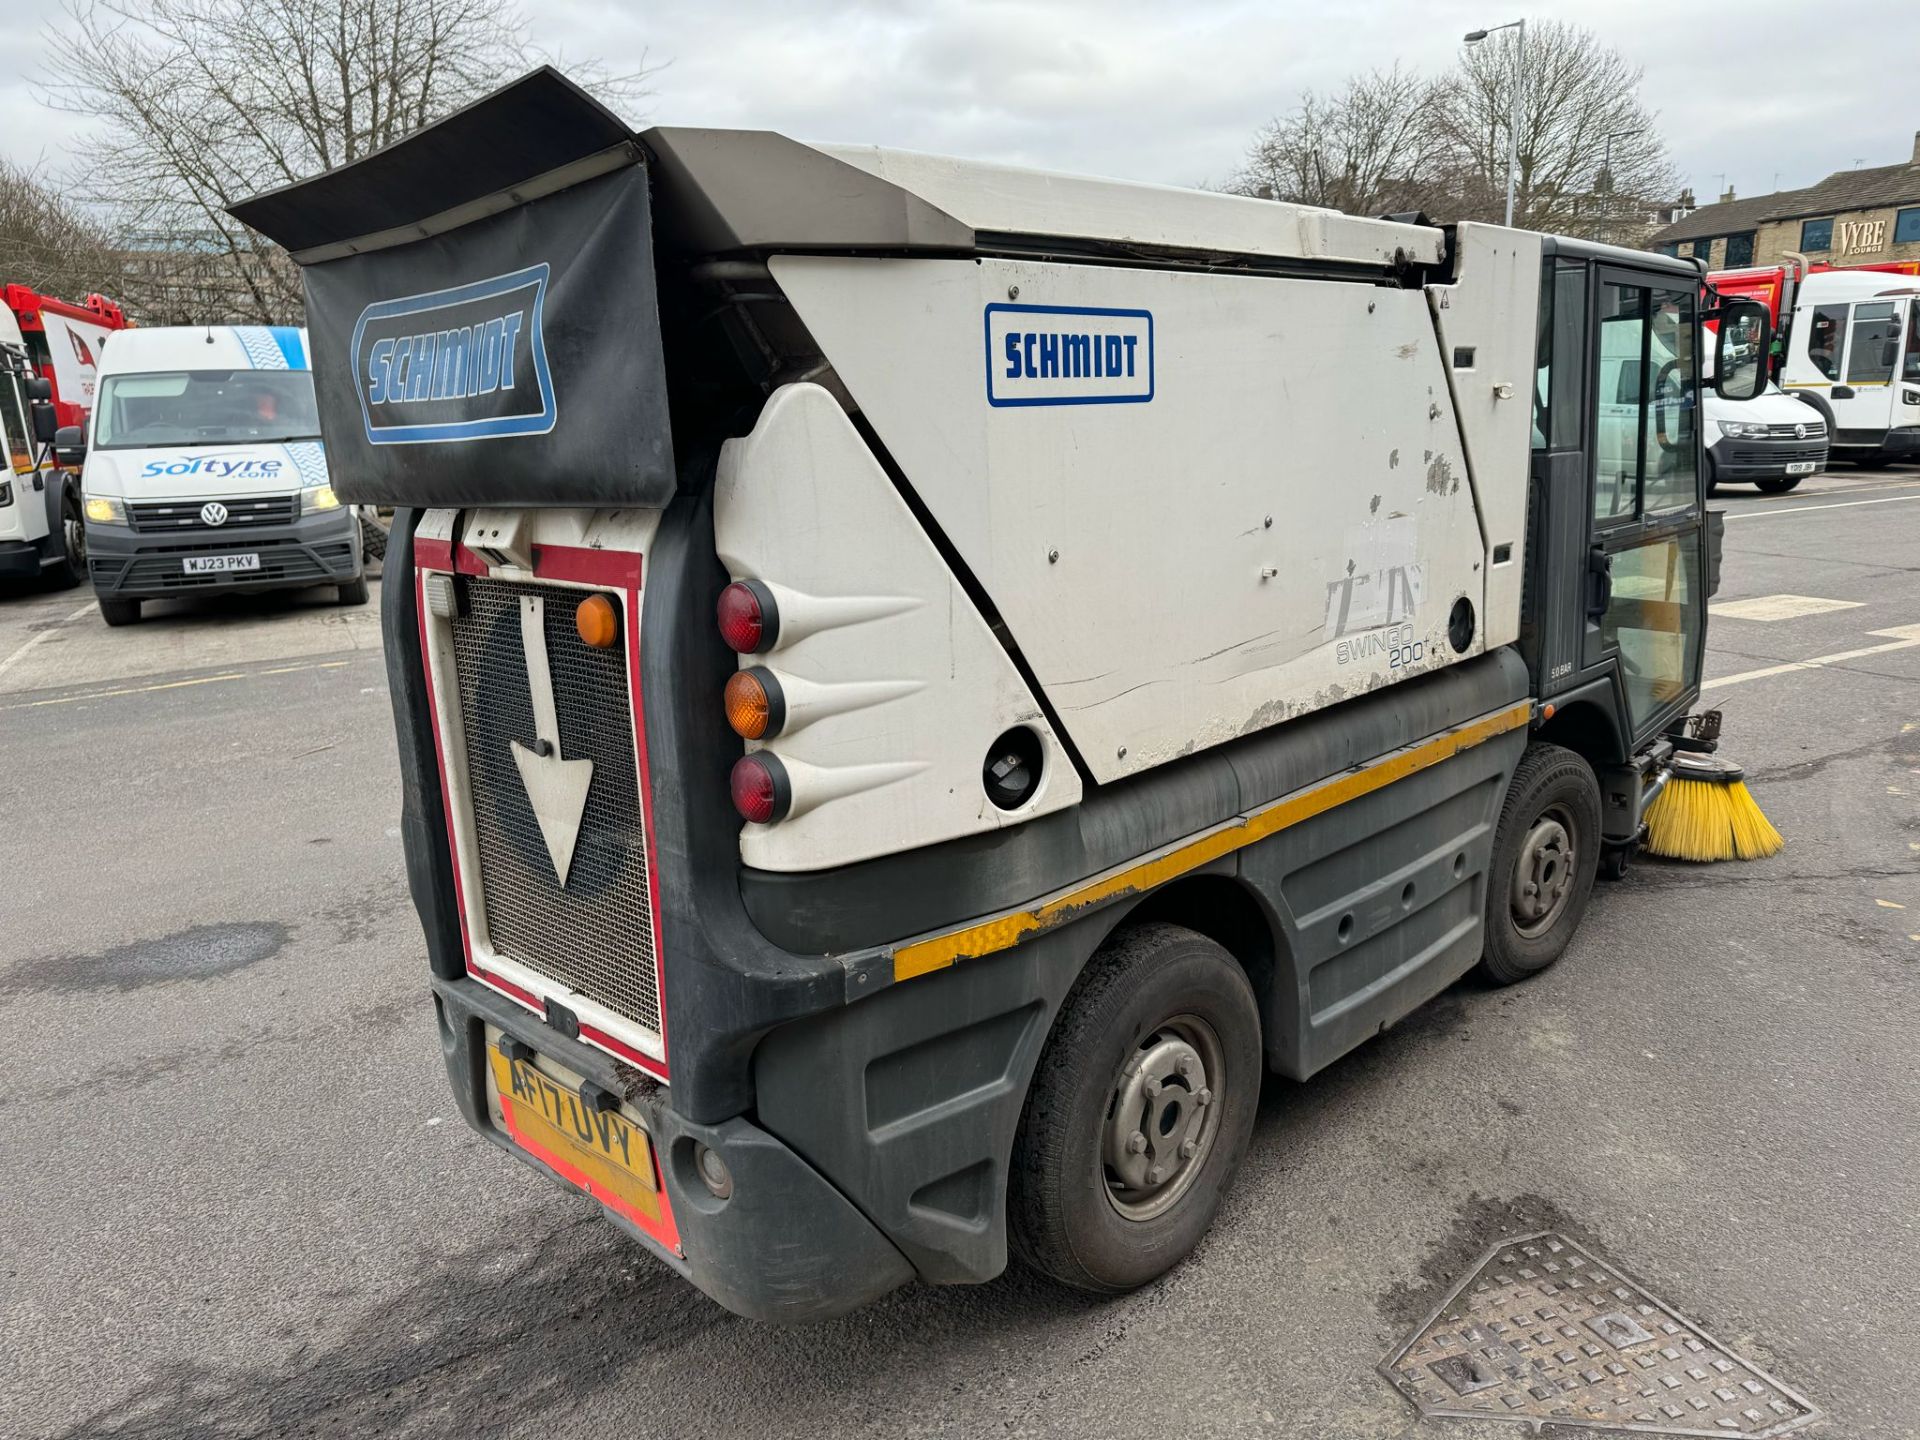 2017, SCHMIDT - Compact 200 Road Sweeper (Ex-Council fleet owned and maintained) - Image 8 of 32